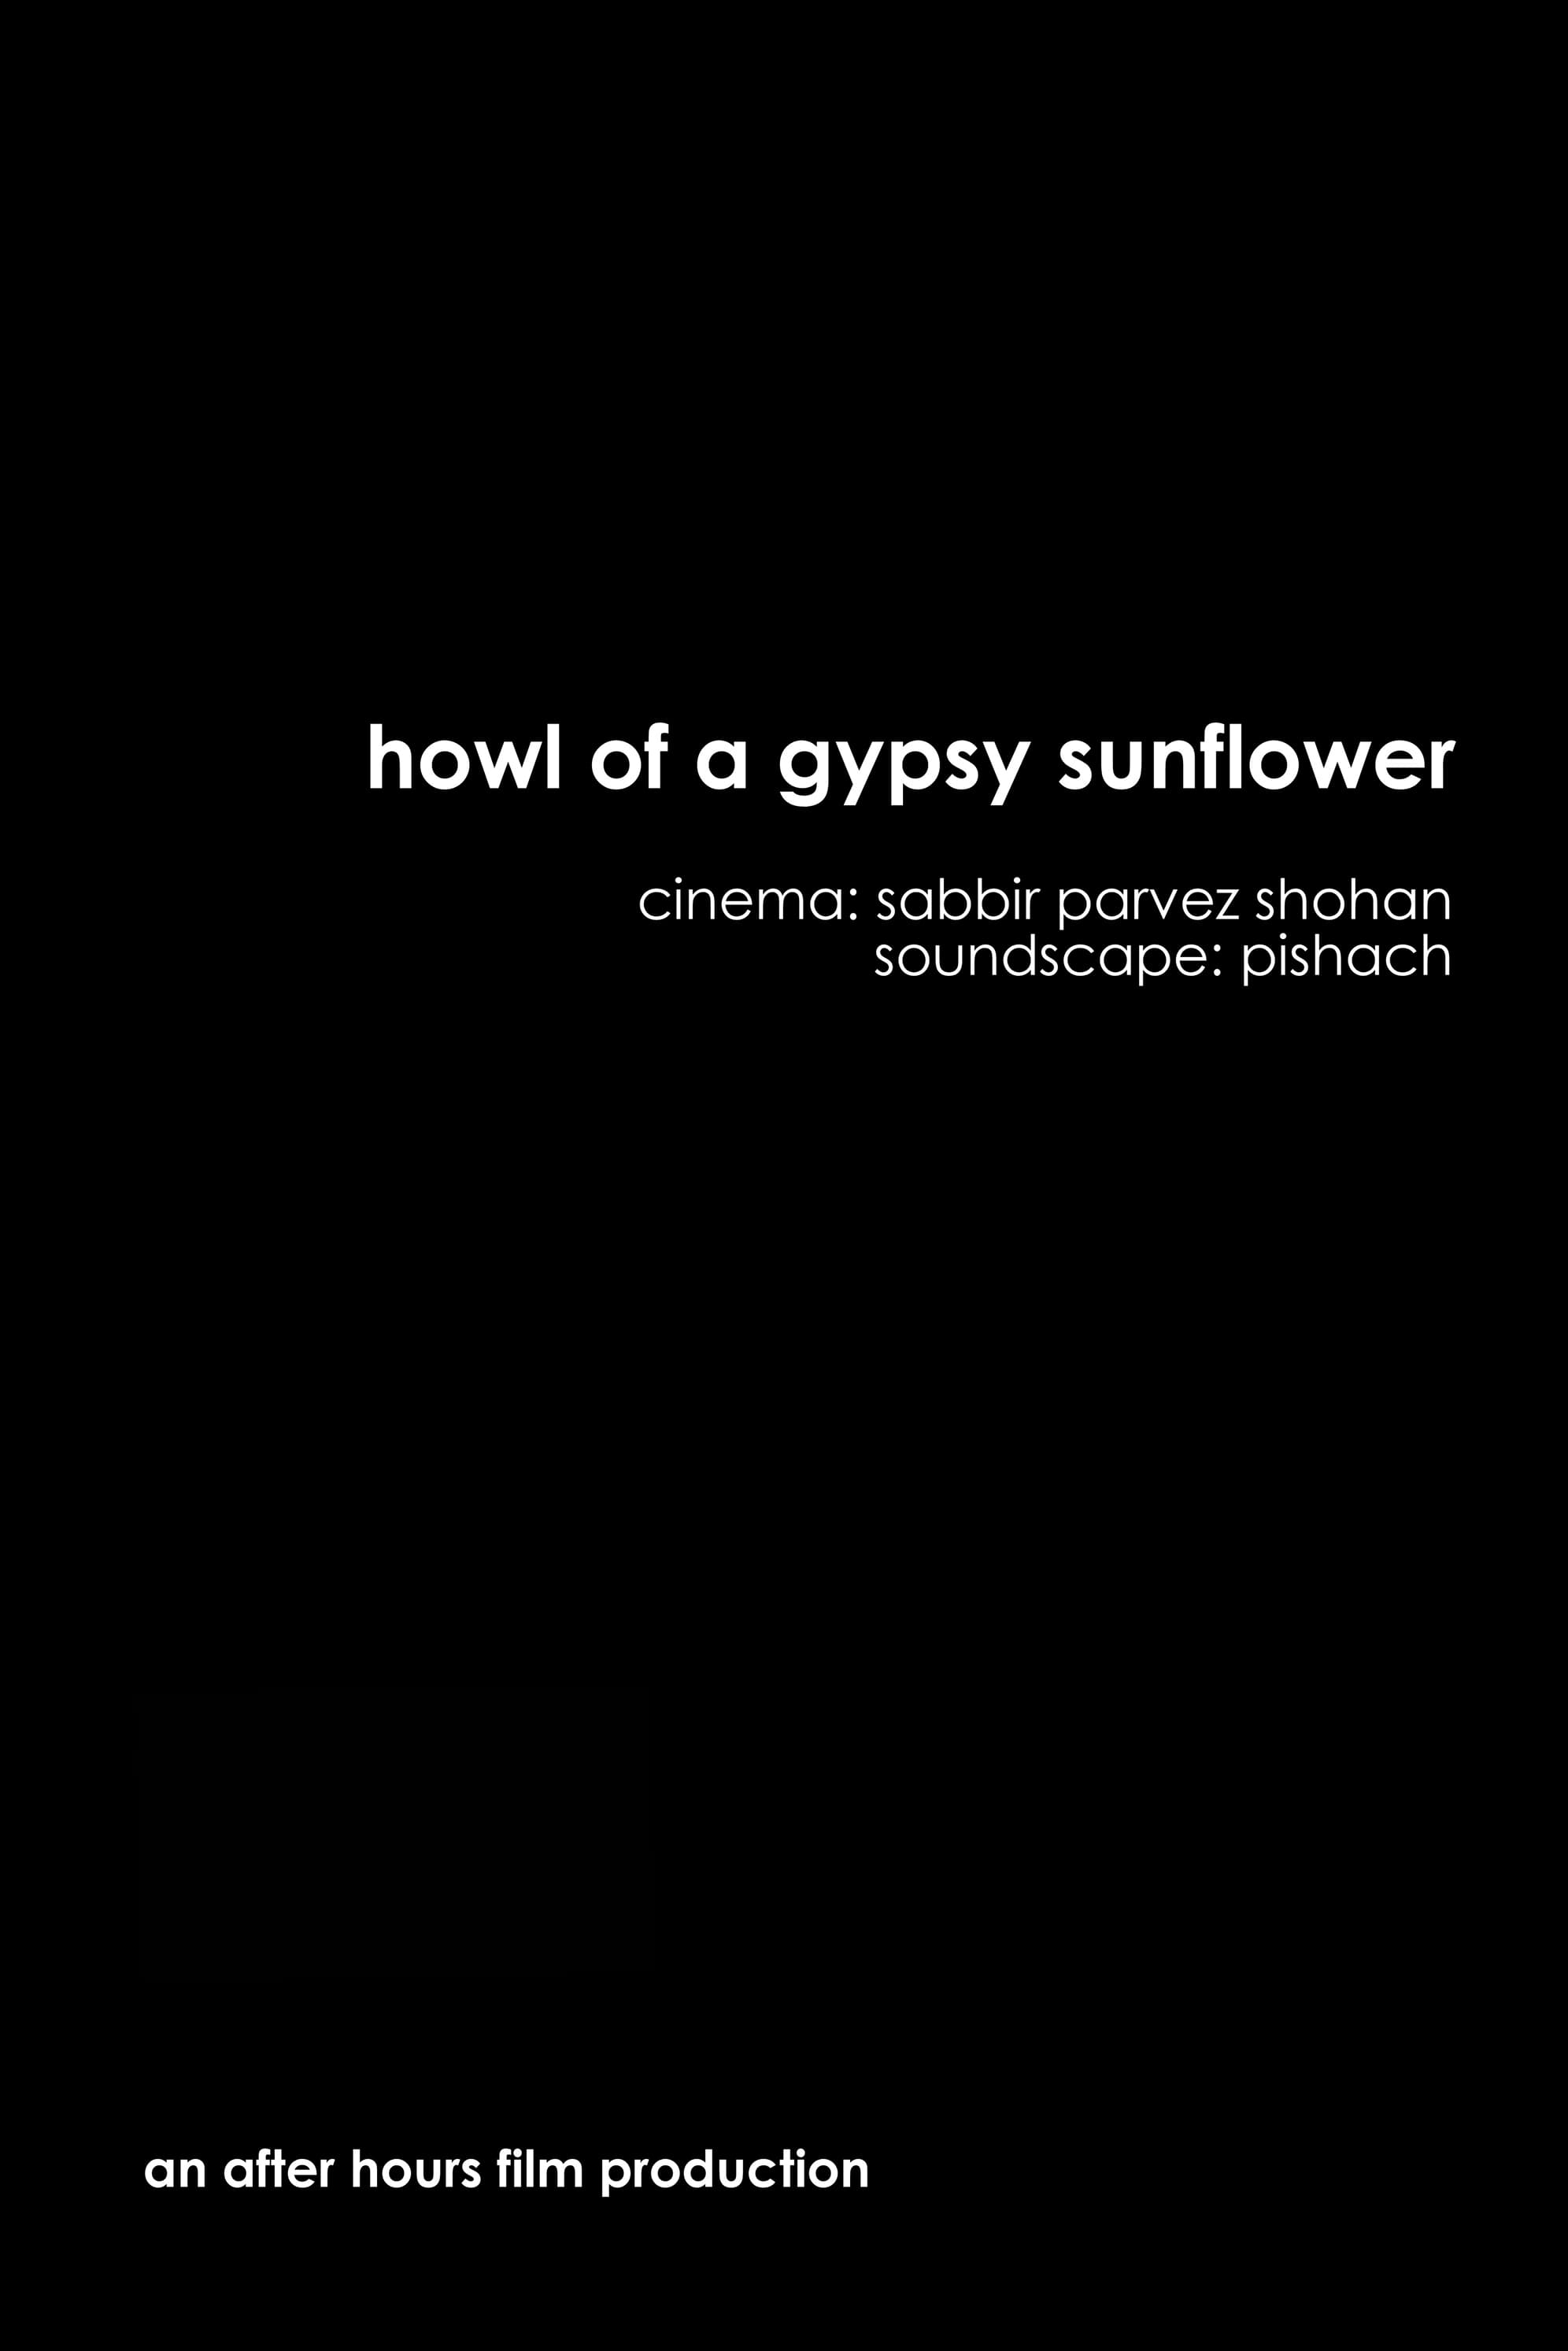 Howl of a Gypsy Sunflower